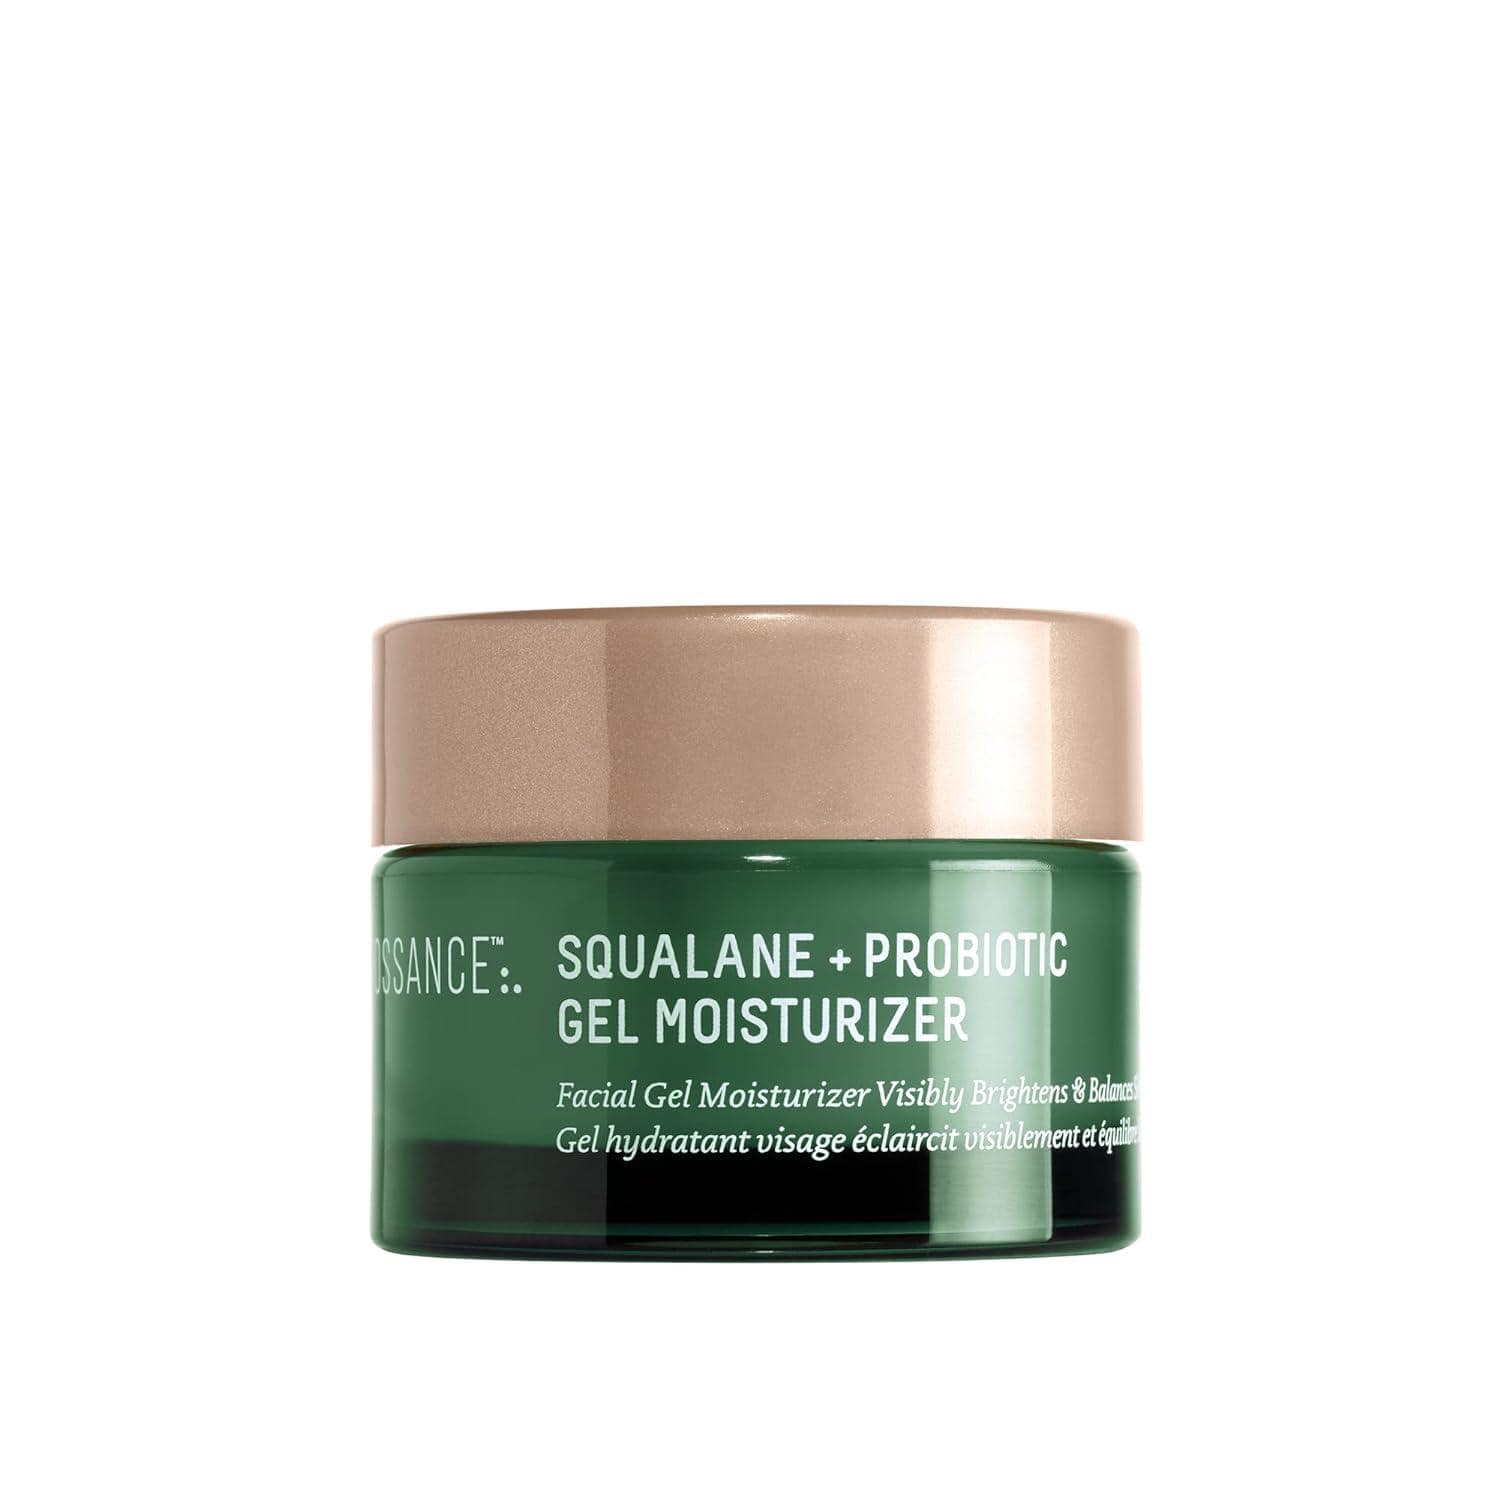 Biossance's Squalane + Probiotic Gel Moisturizer-Your Sustainable and Clinically Proven Moisturizers for Bright, Balanced Skin.